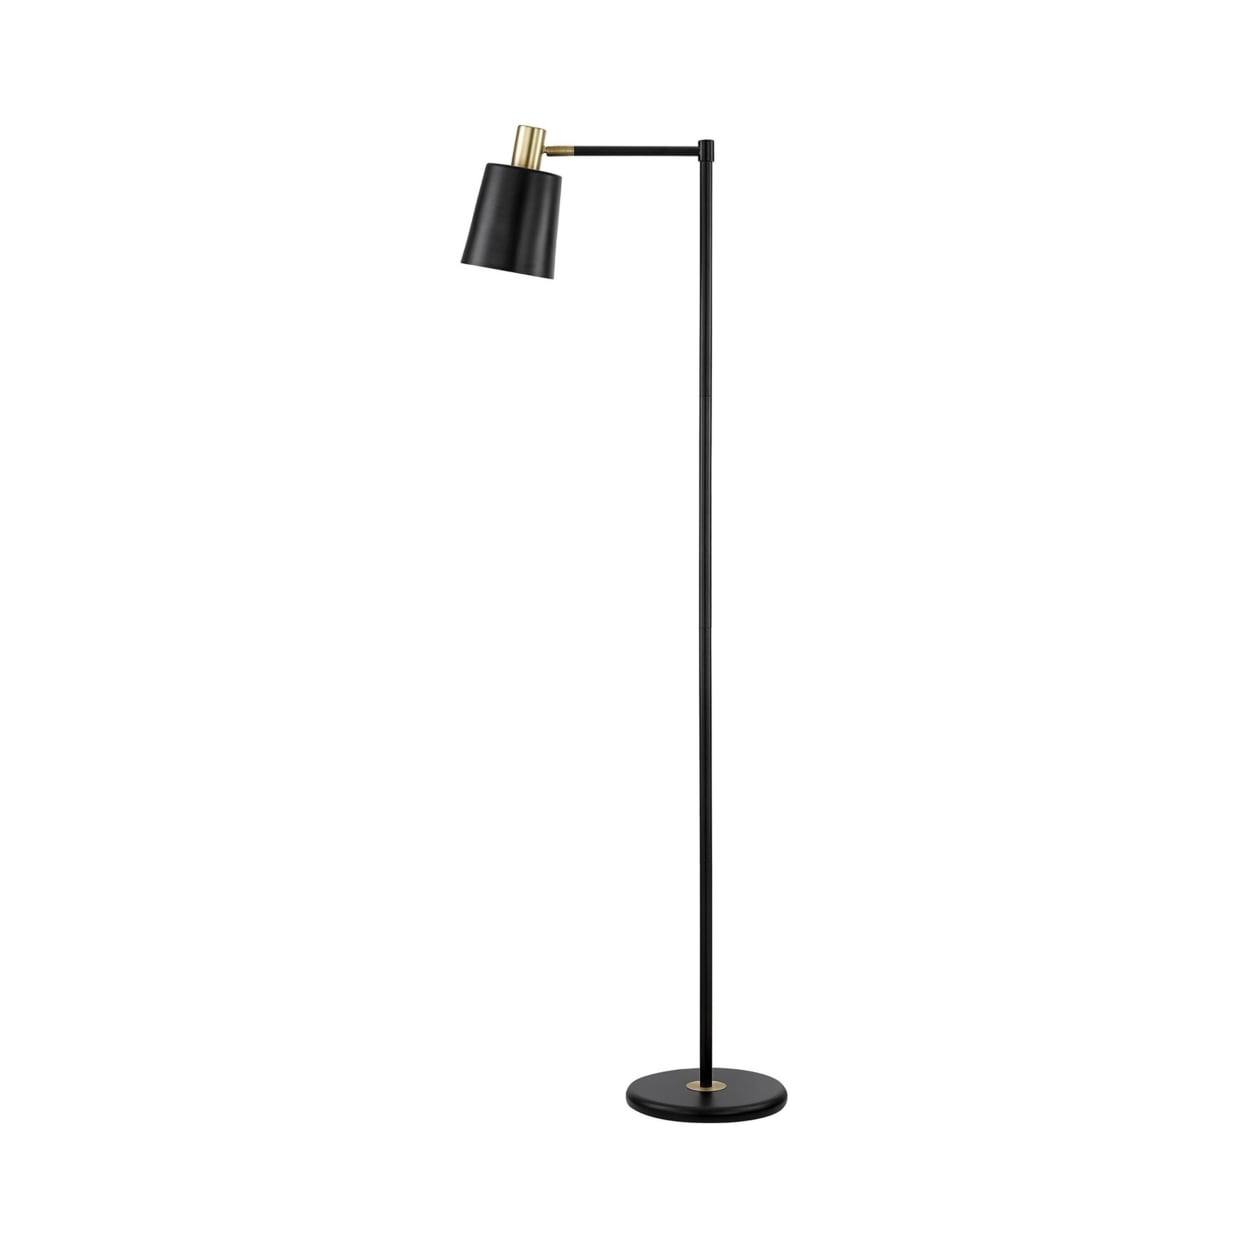 Picture of Benjara BM233239 60 x 20.5 x 10 in. Tubular Metal Floor Lamp with Horn Style Shade, Black